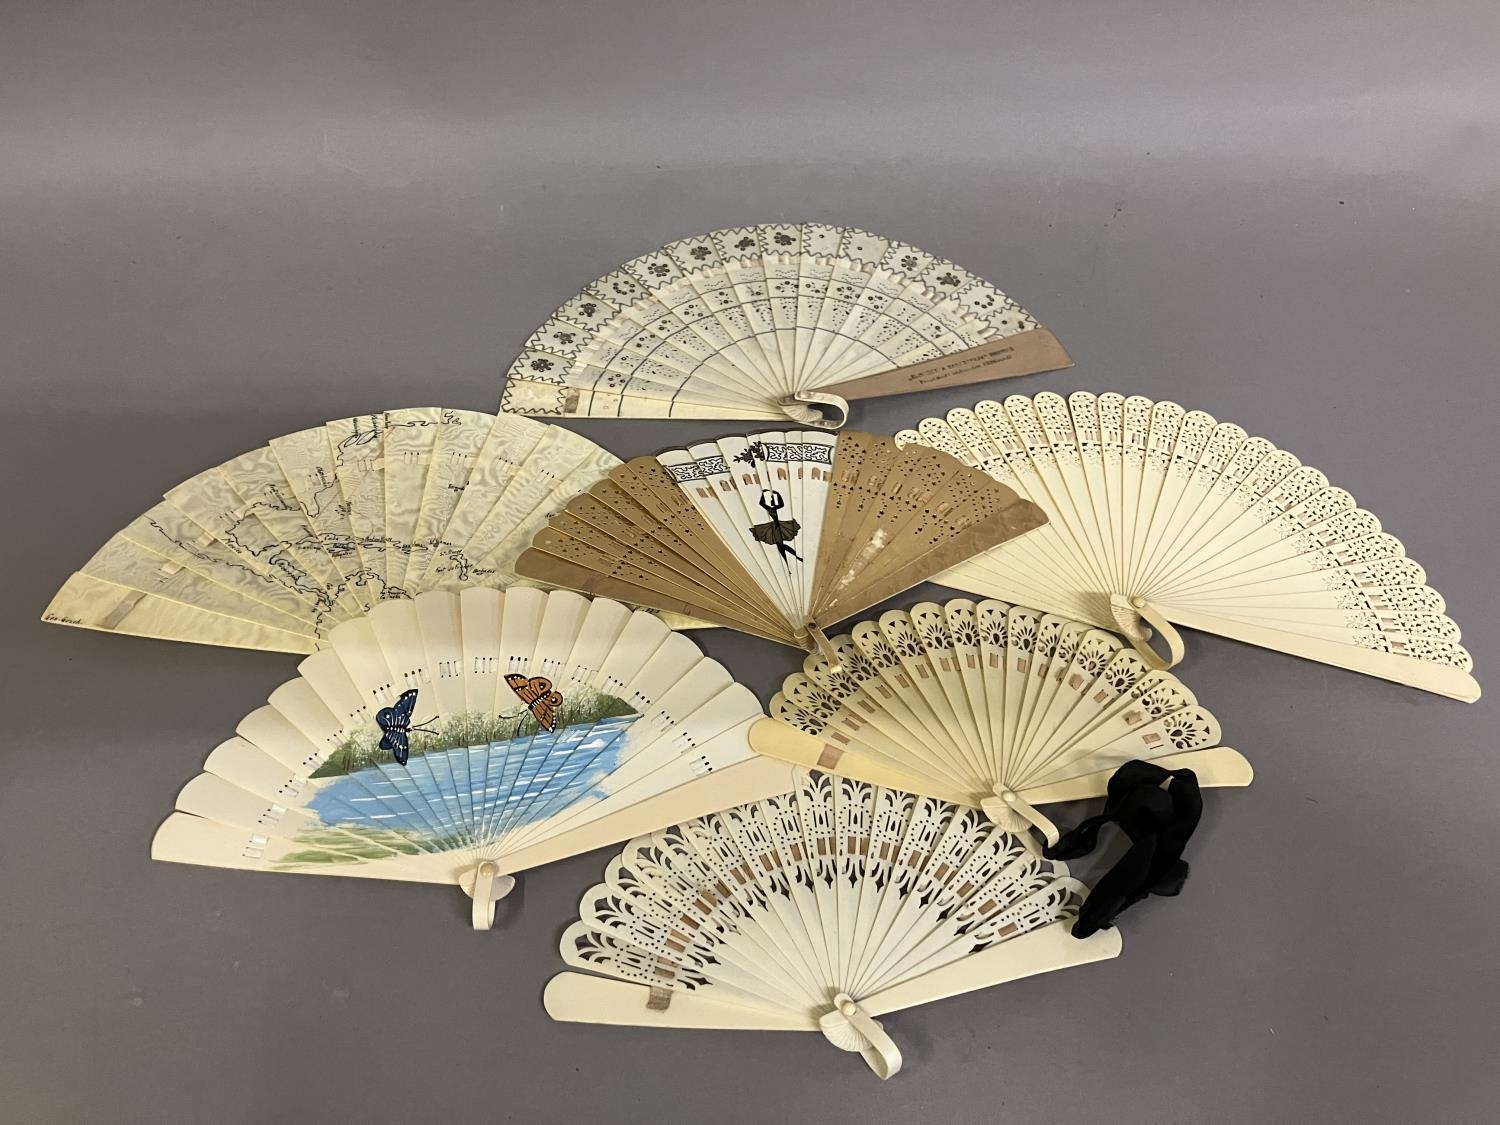 A selection of small brisé fans: a brisé fan advertising Victoria Luise, a shield on the lower guard